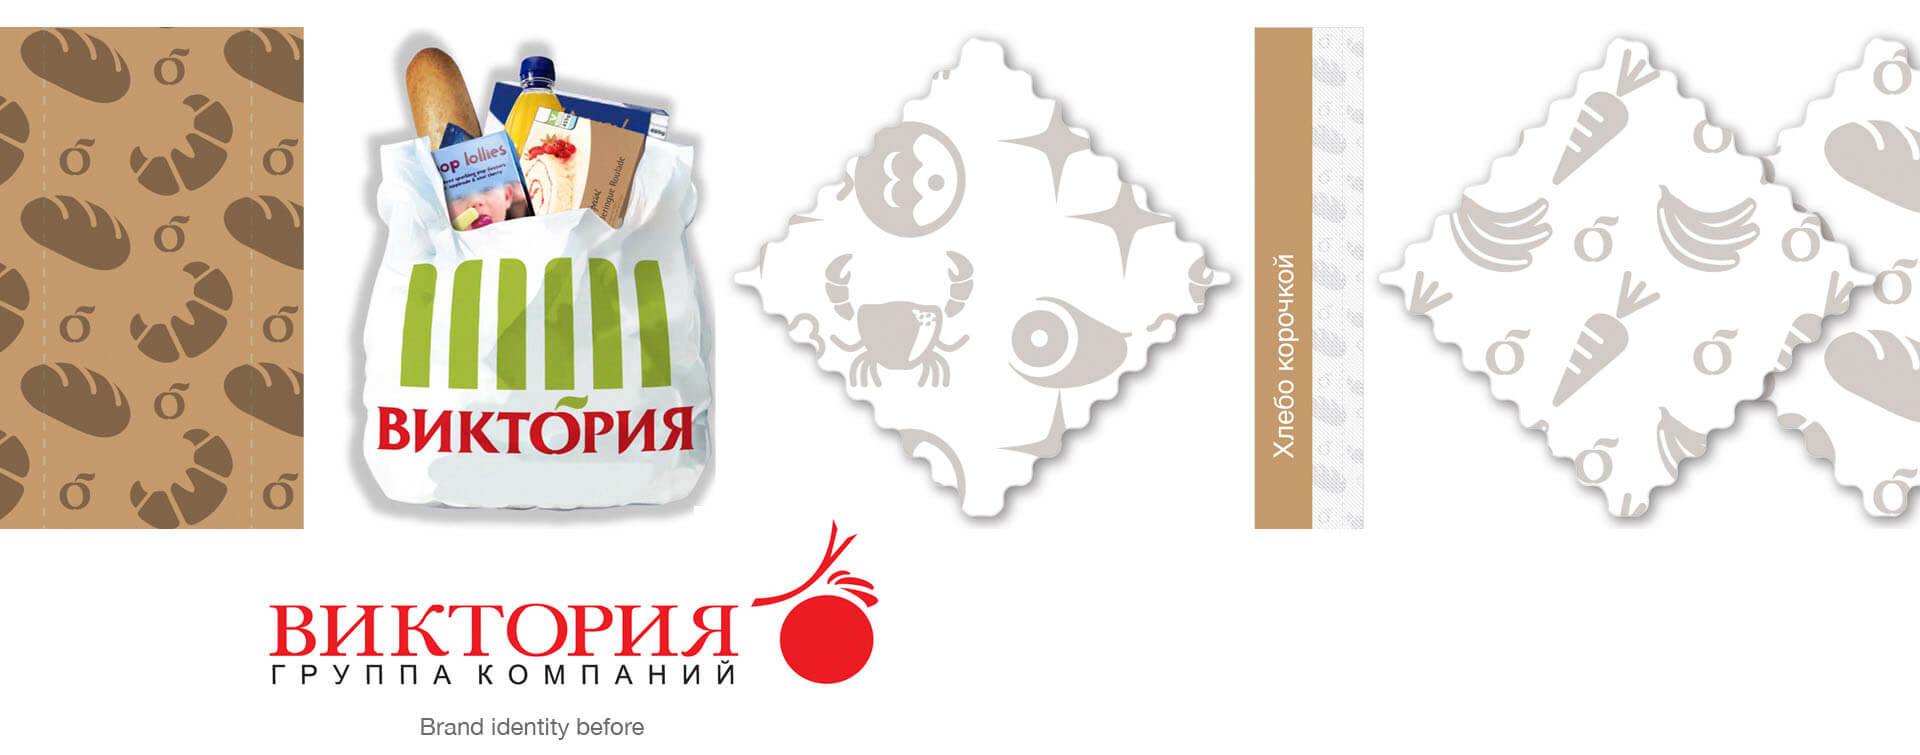 Victoria supermarkets Russian stores brand packaging design